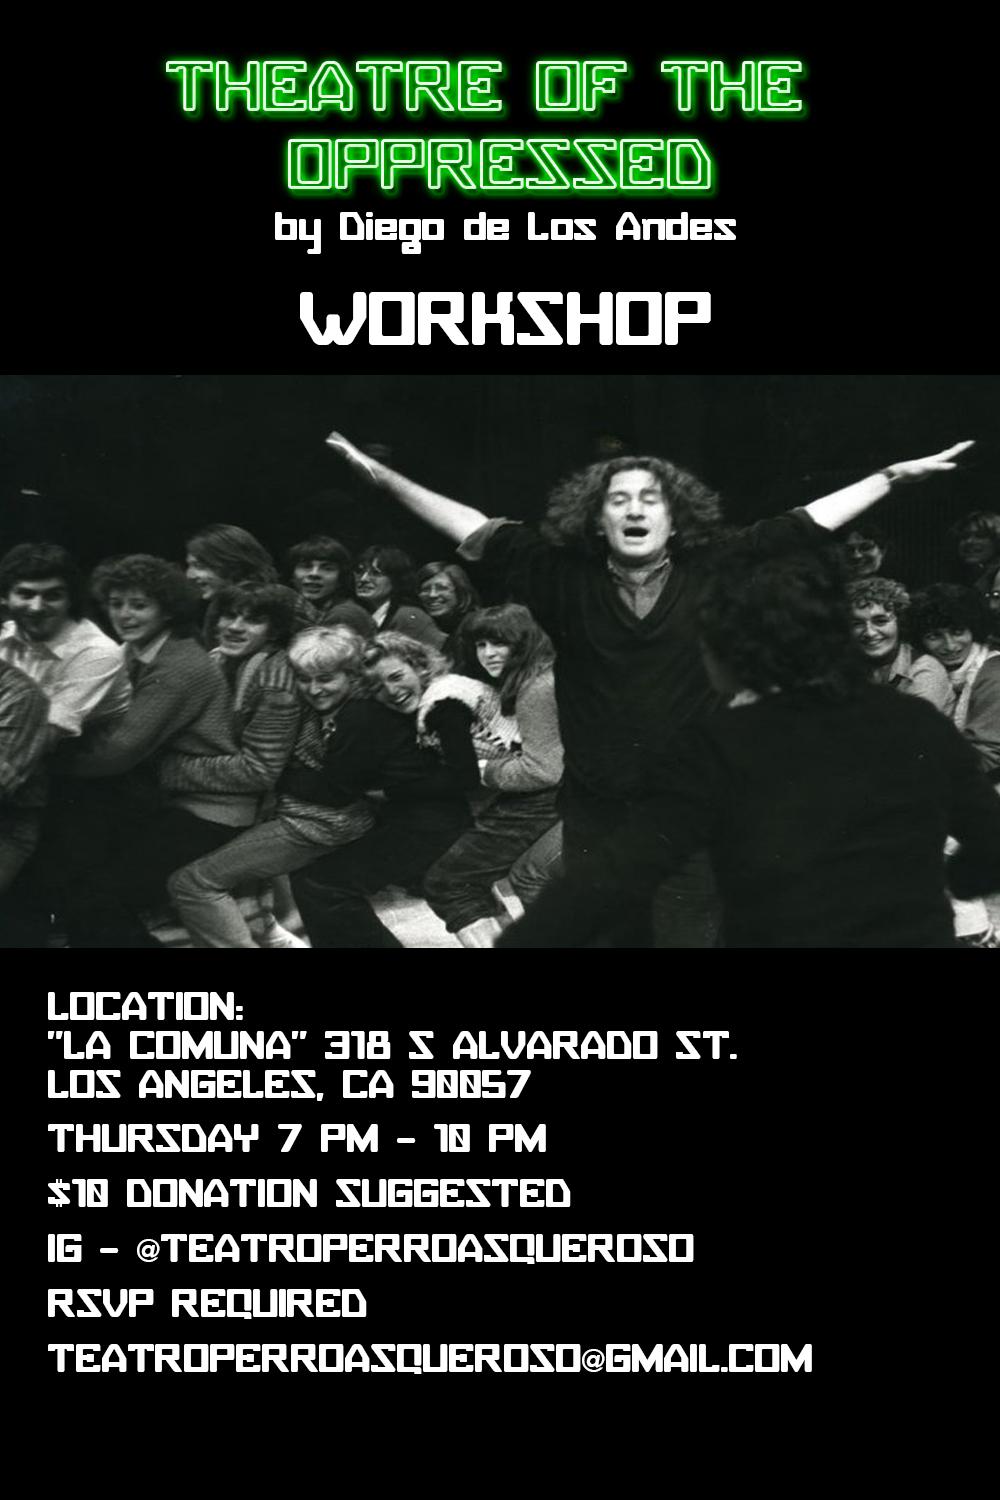 THEATRE OF THE OPPRESSED WORKSHOP